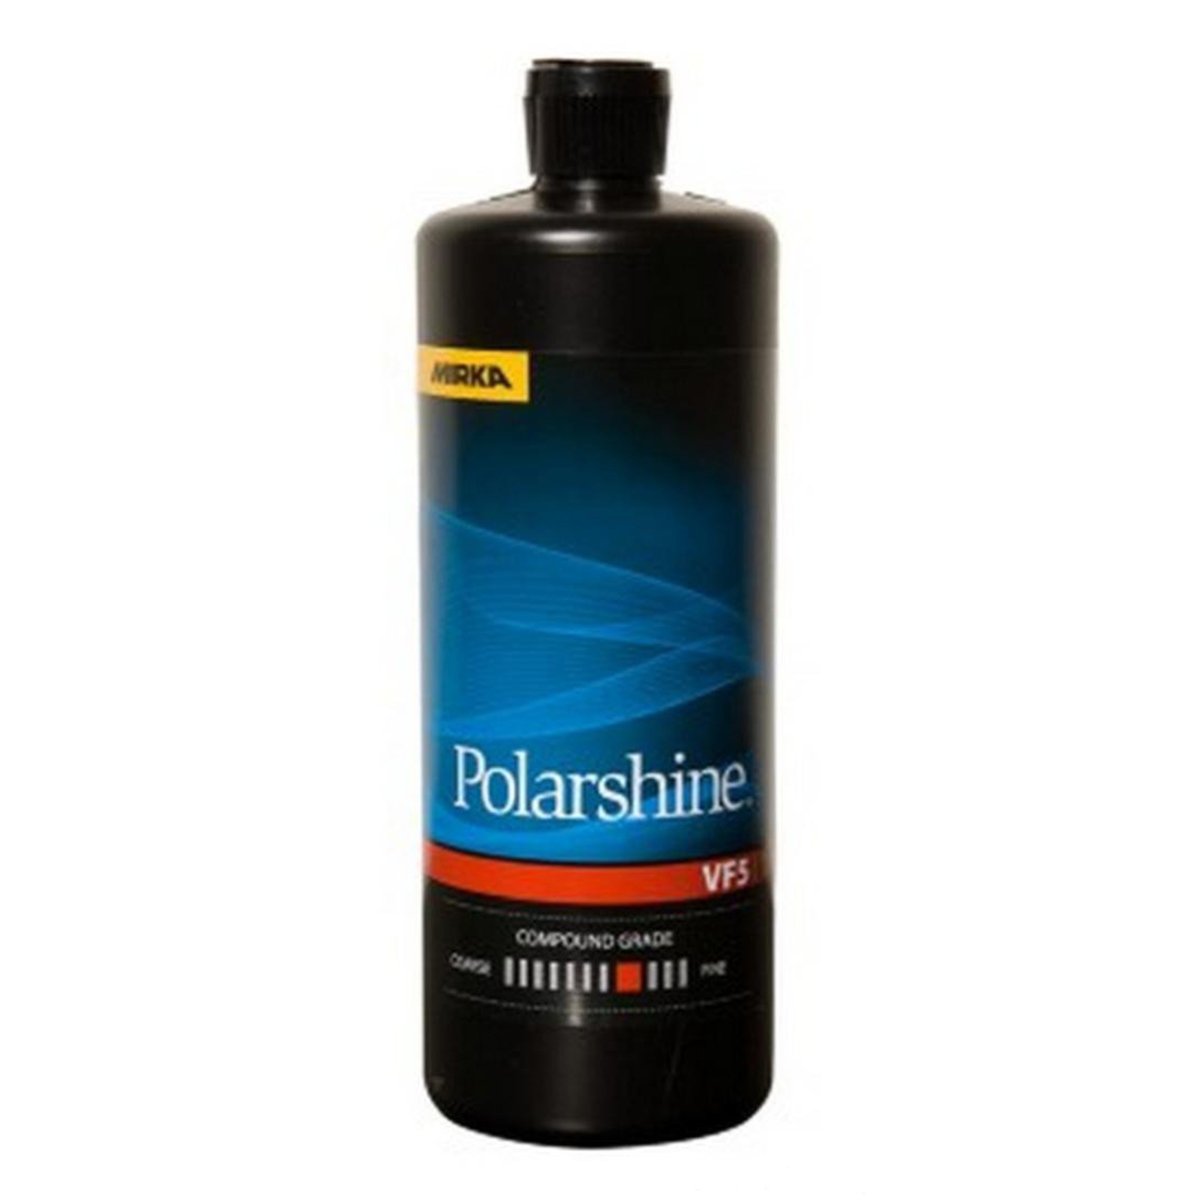 A 1L bottle of Mirka's Polarshine VF5 abrasive compound for polishing. Scale on label shows that it is about medium-fine.